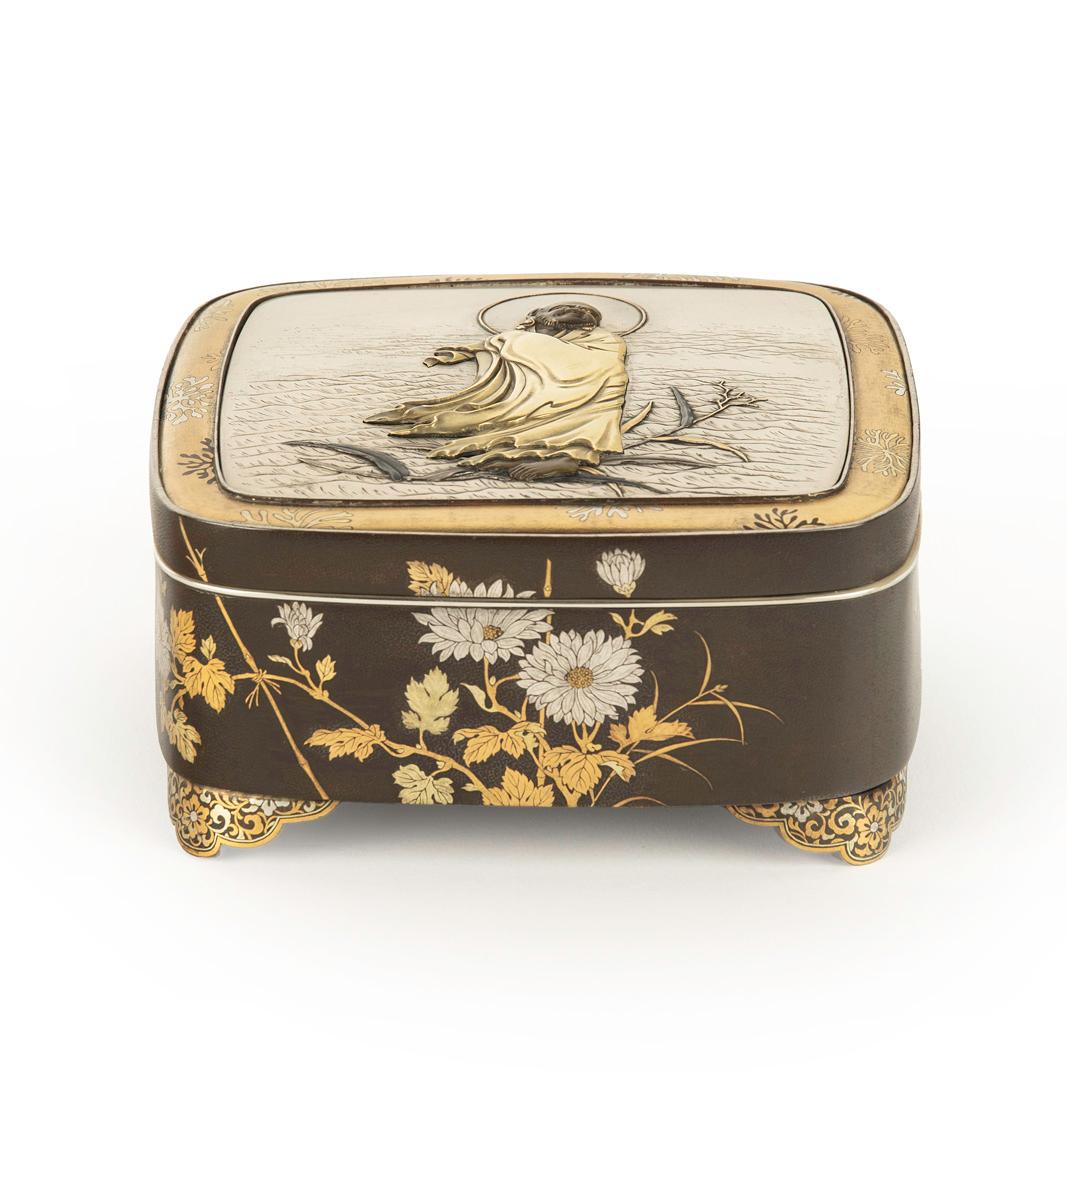 As part of our Japanese works of art collection we are delighted to offer this very finely worked Meiji Period (1868-1912) mixed metal lidded box, that we confidently attribute to Kajima Ikkoku II. The large size square form bronze box stands upon